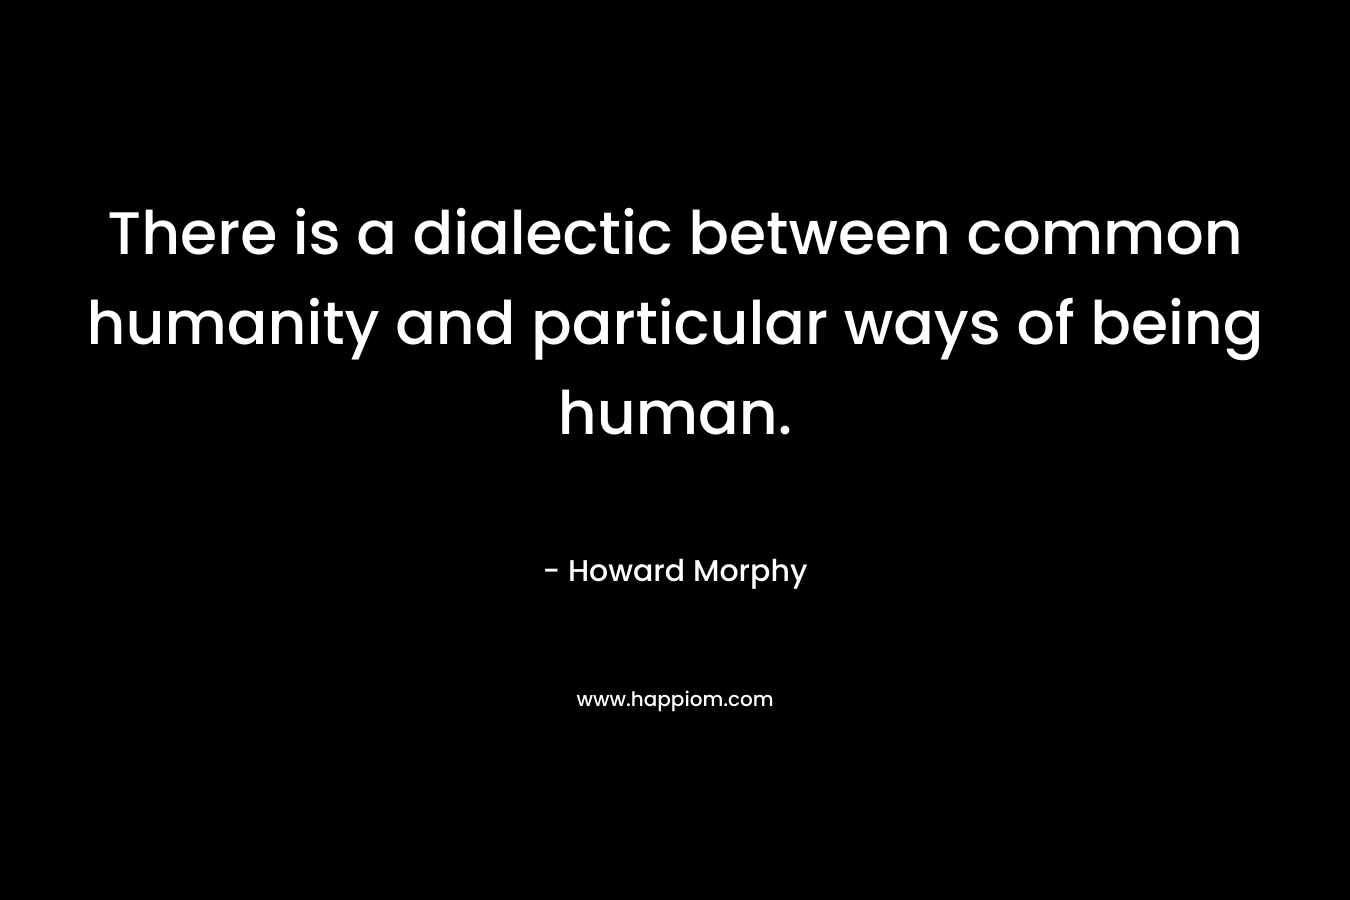 There is a dialectic between common humanity and particular ways of being human.